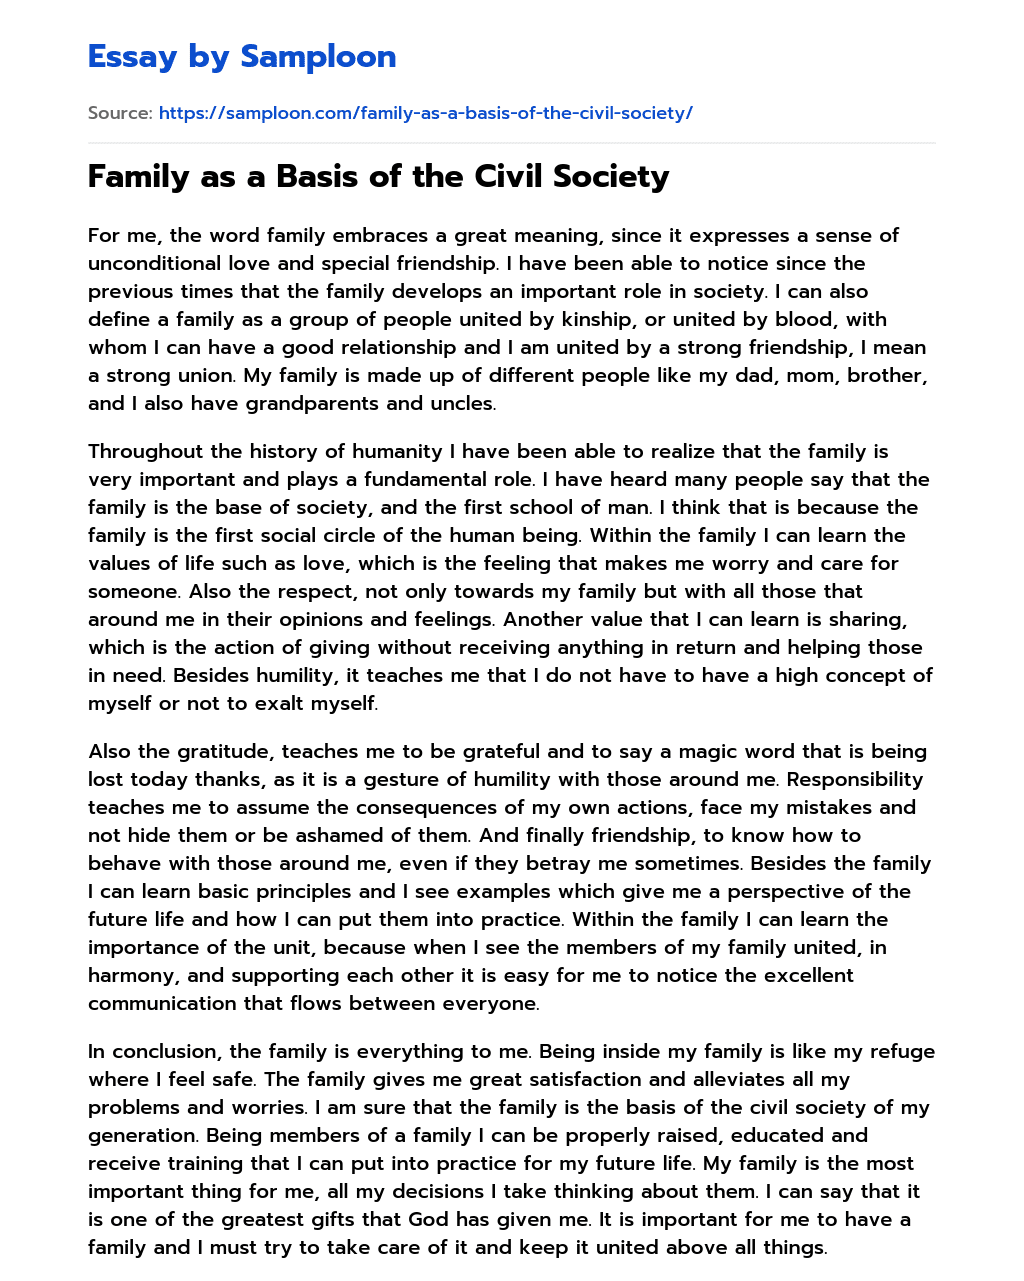 Family as a Basis of the Civil Society essay